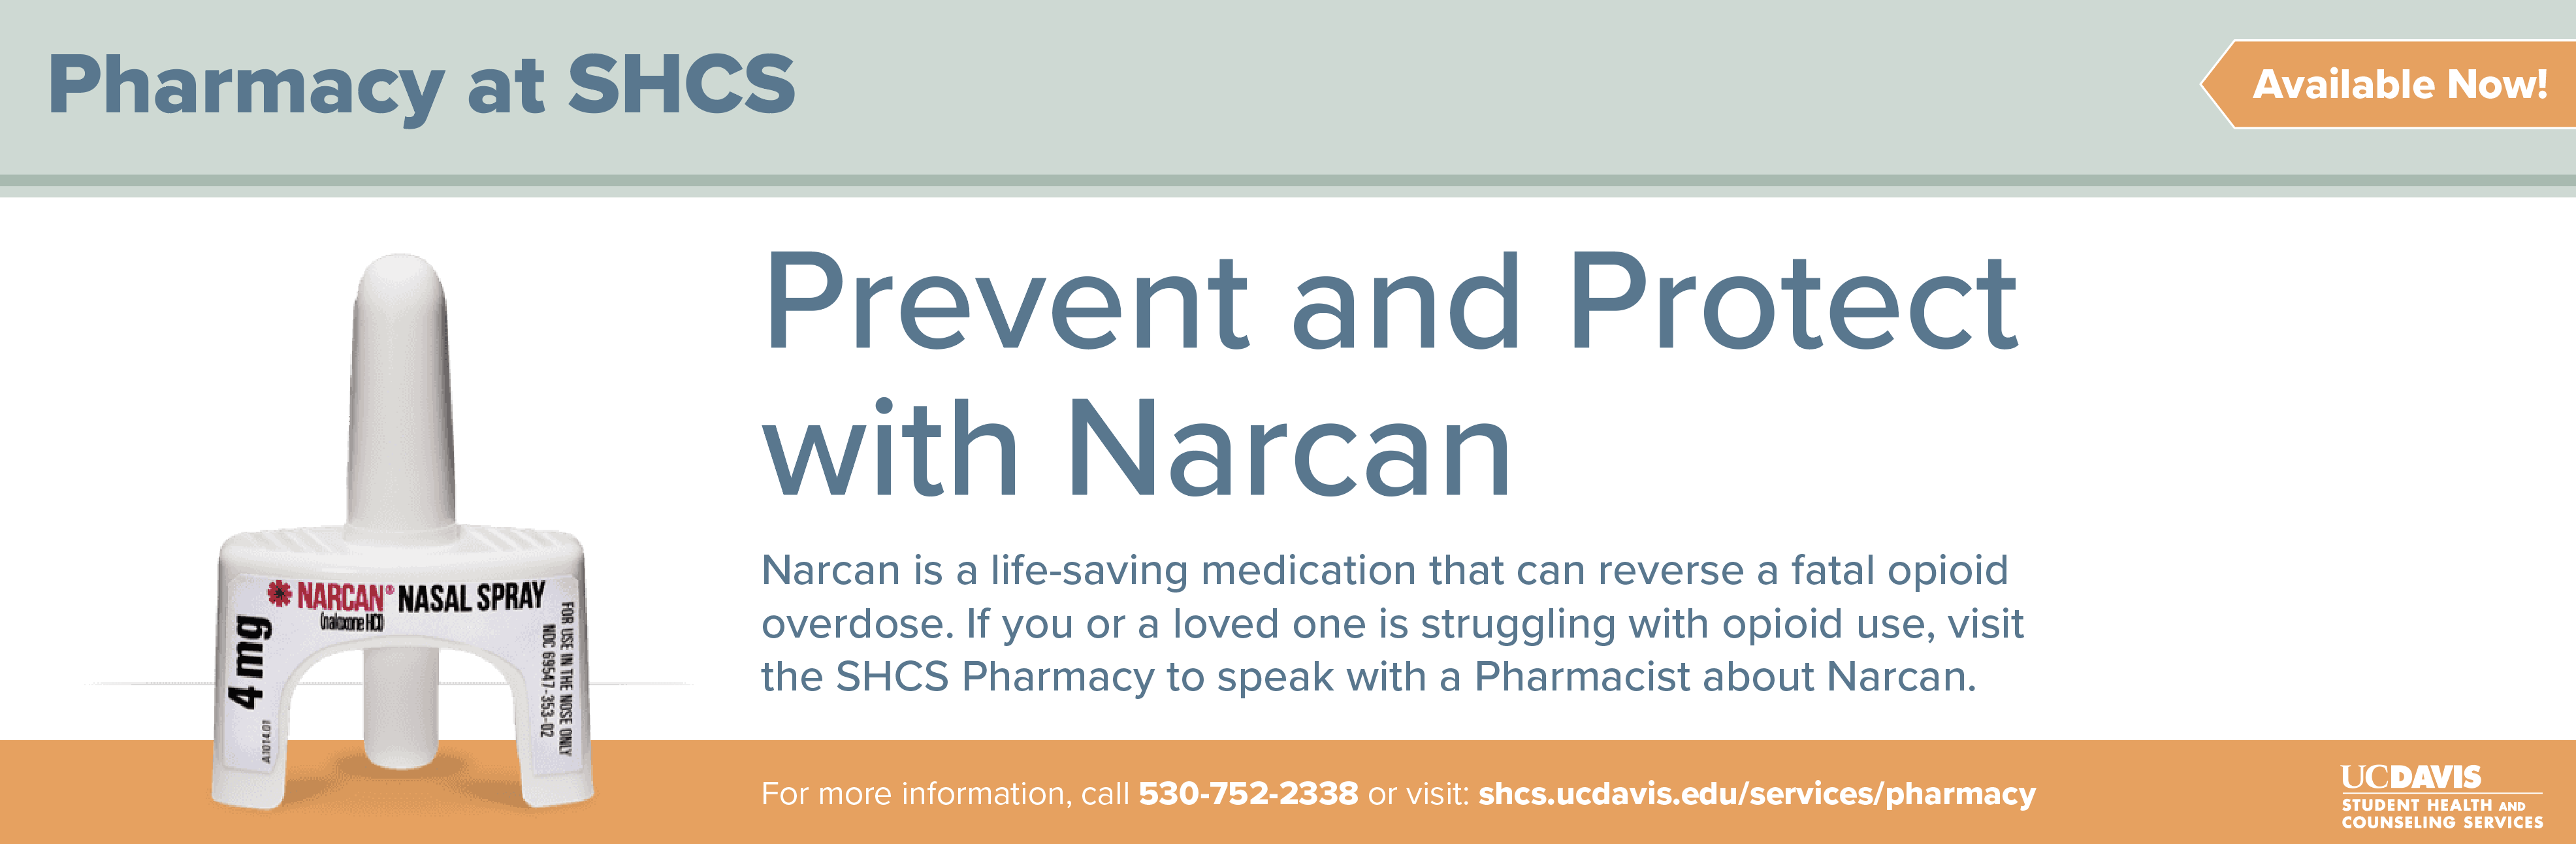 Banner with image of Narcan prescription and "prevent and protect with Narcan"